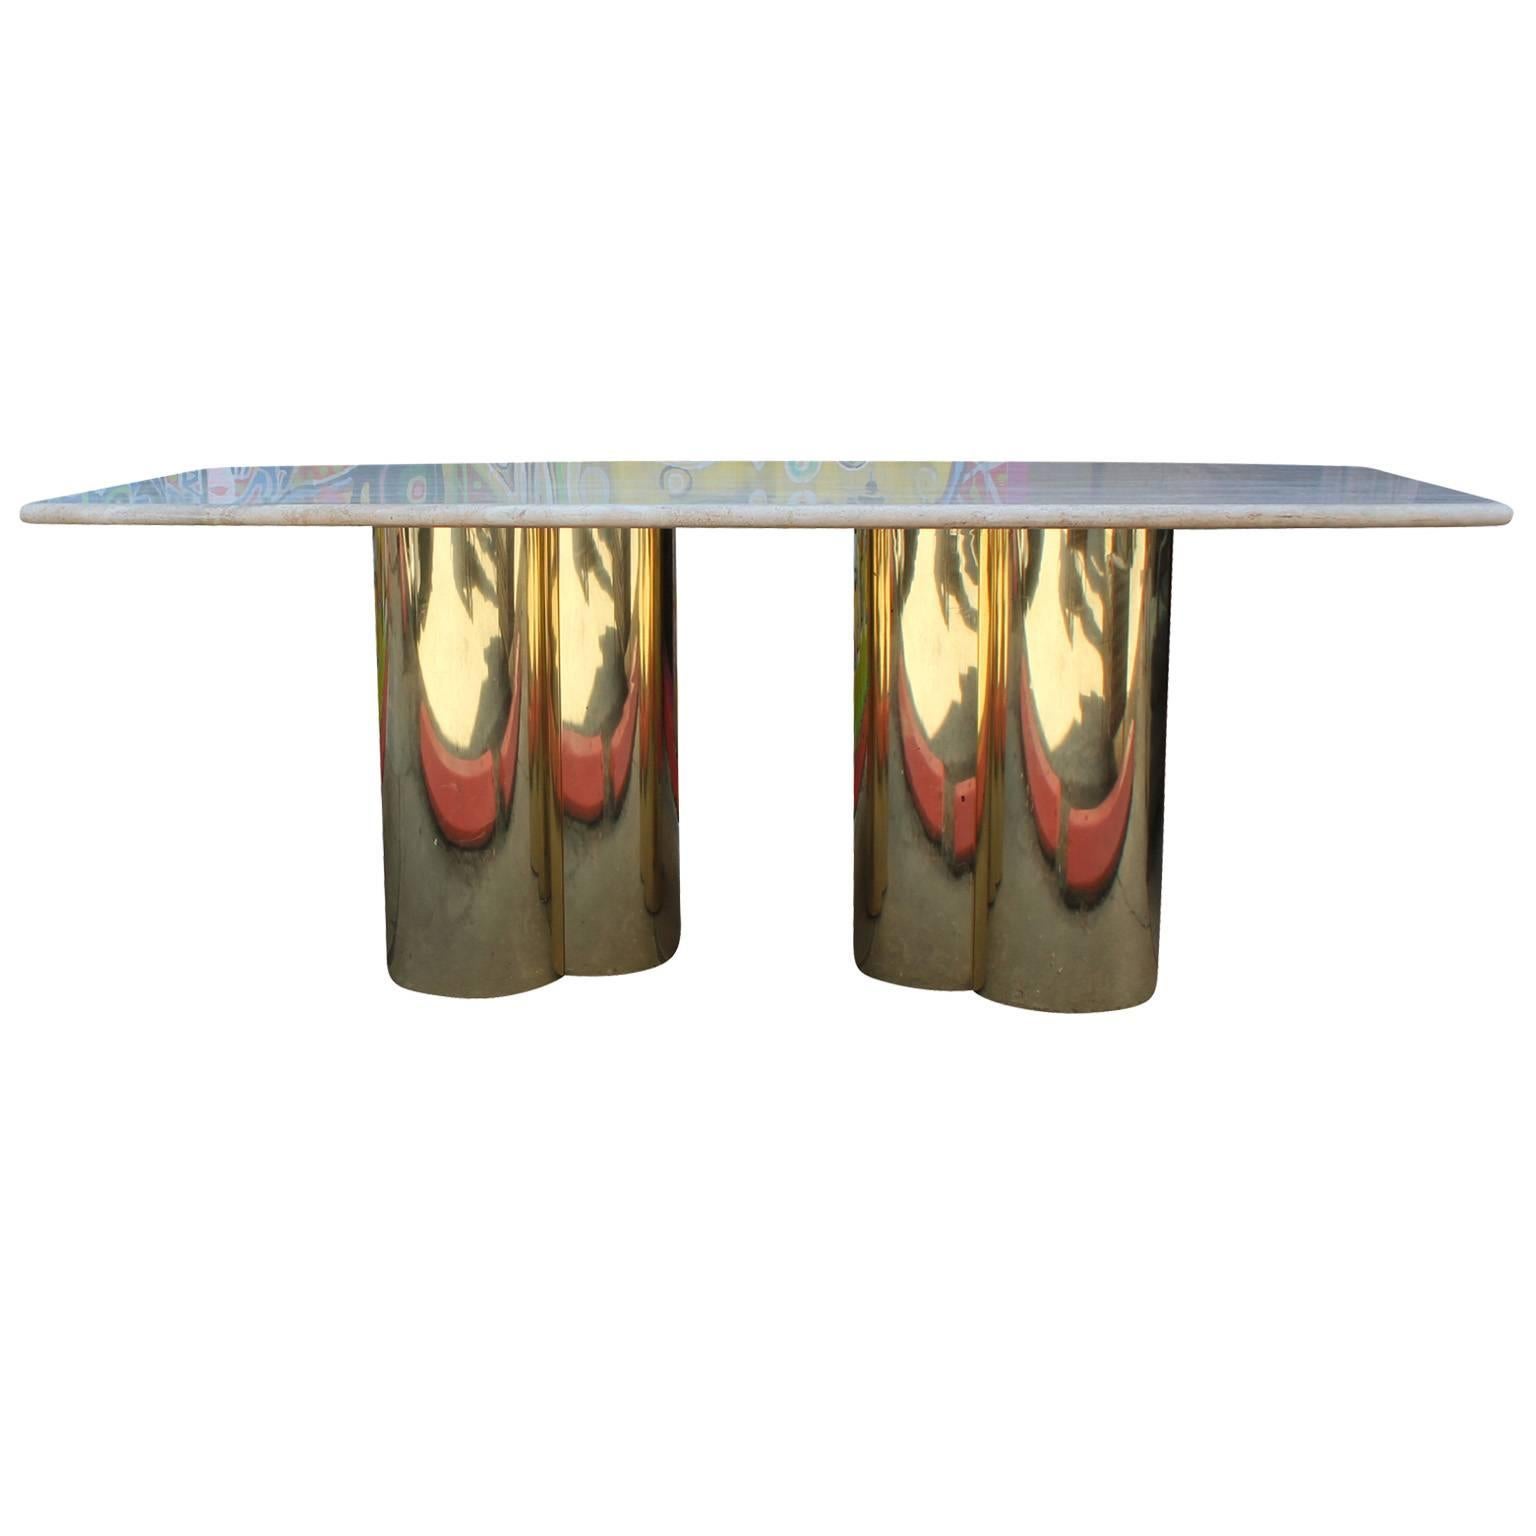 North American Glamorous Brass Pedestal and Travertine Dining Table